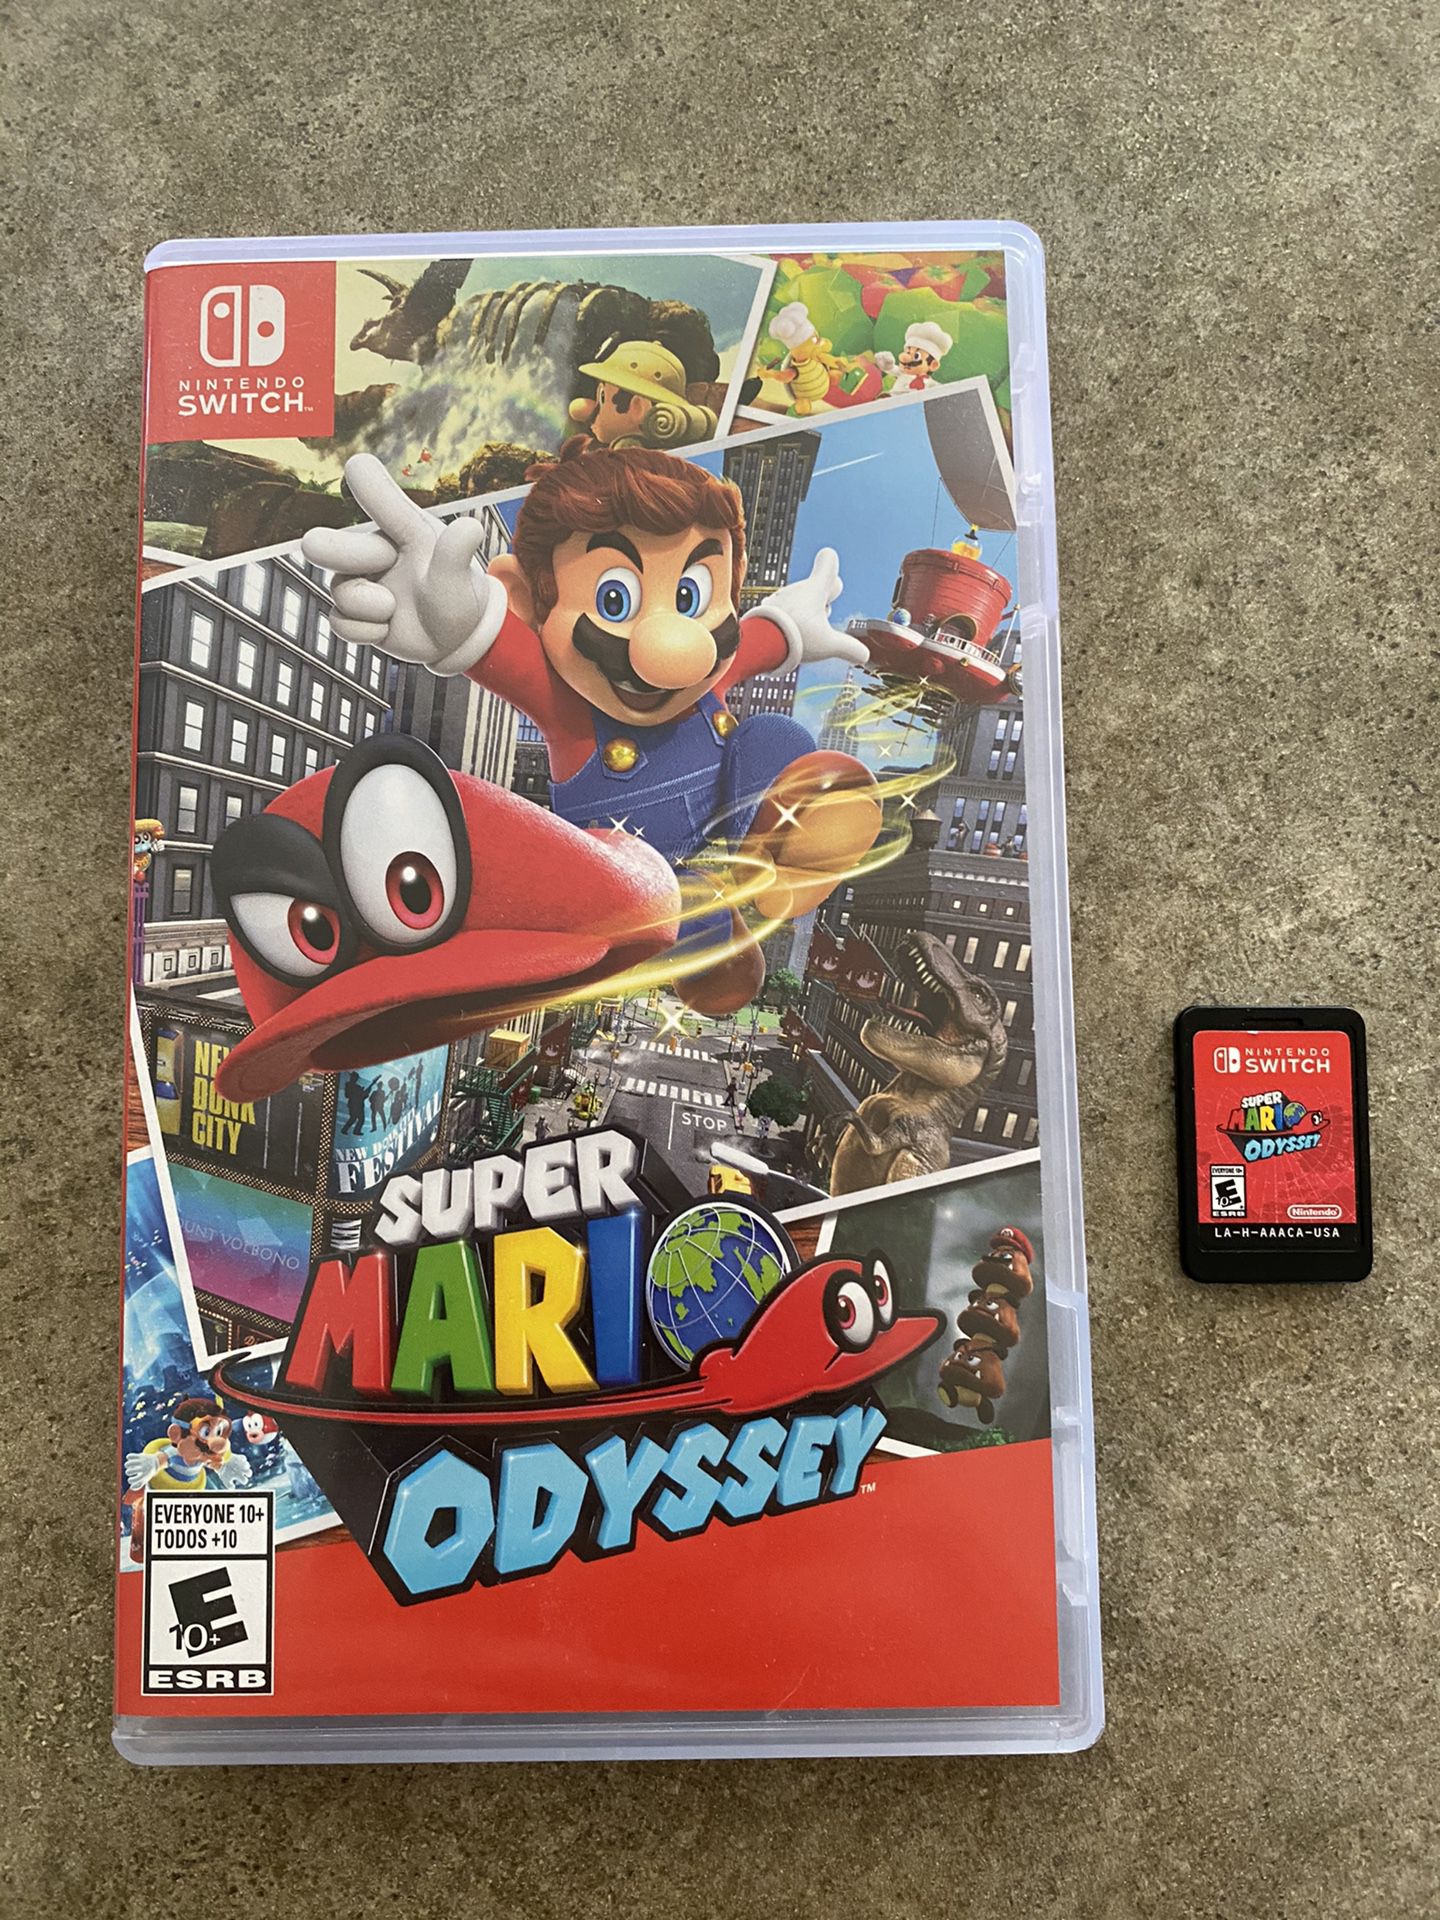 Super Mario Odyssey for Switch